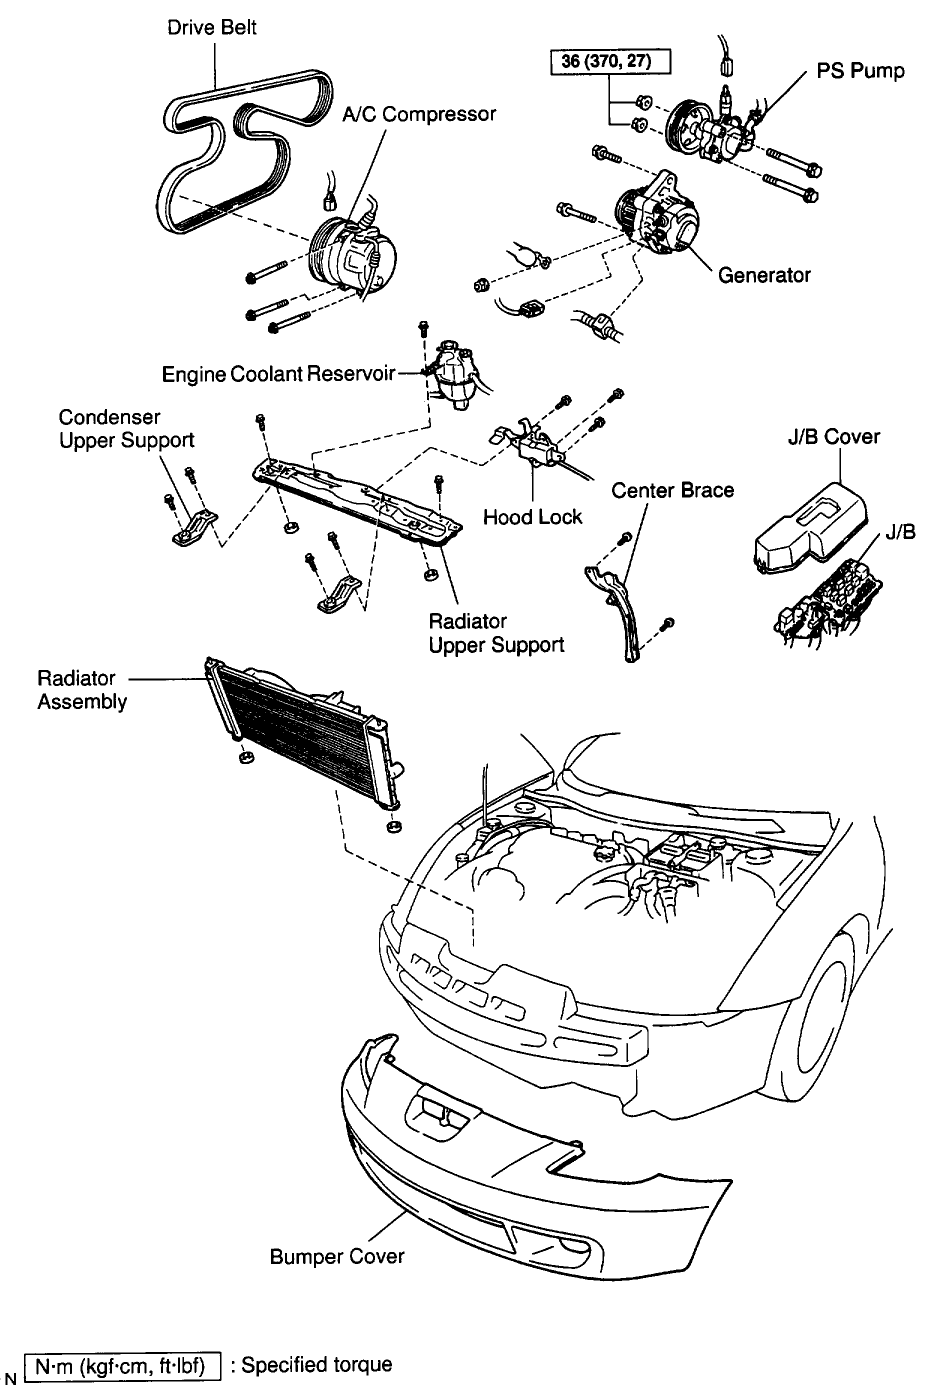 diagrams_engine_compartment2.gif